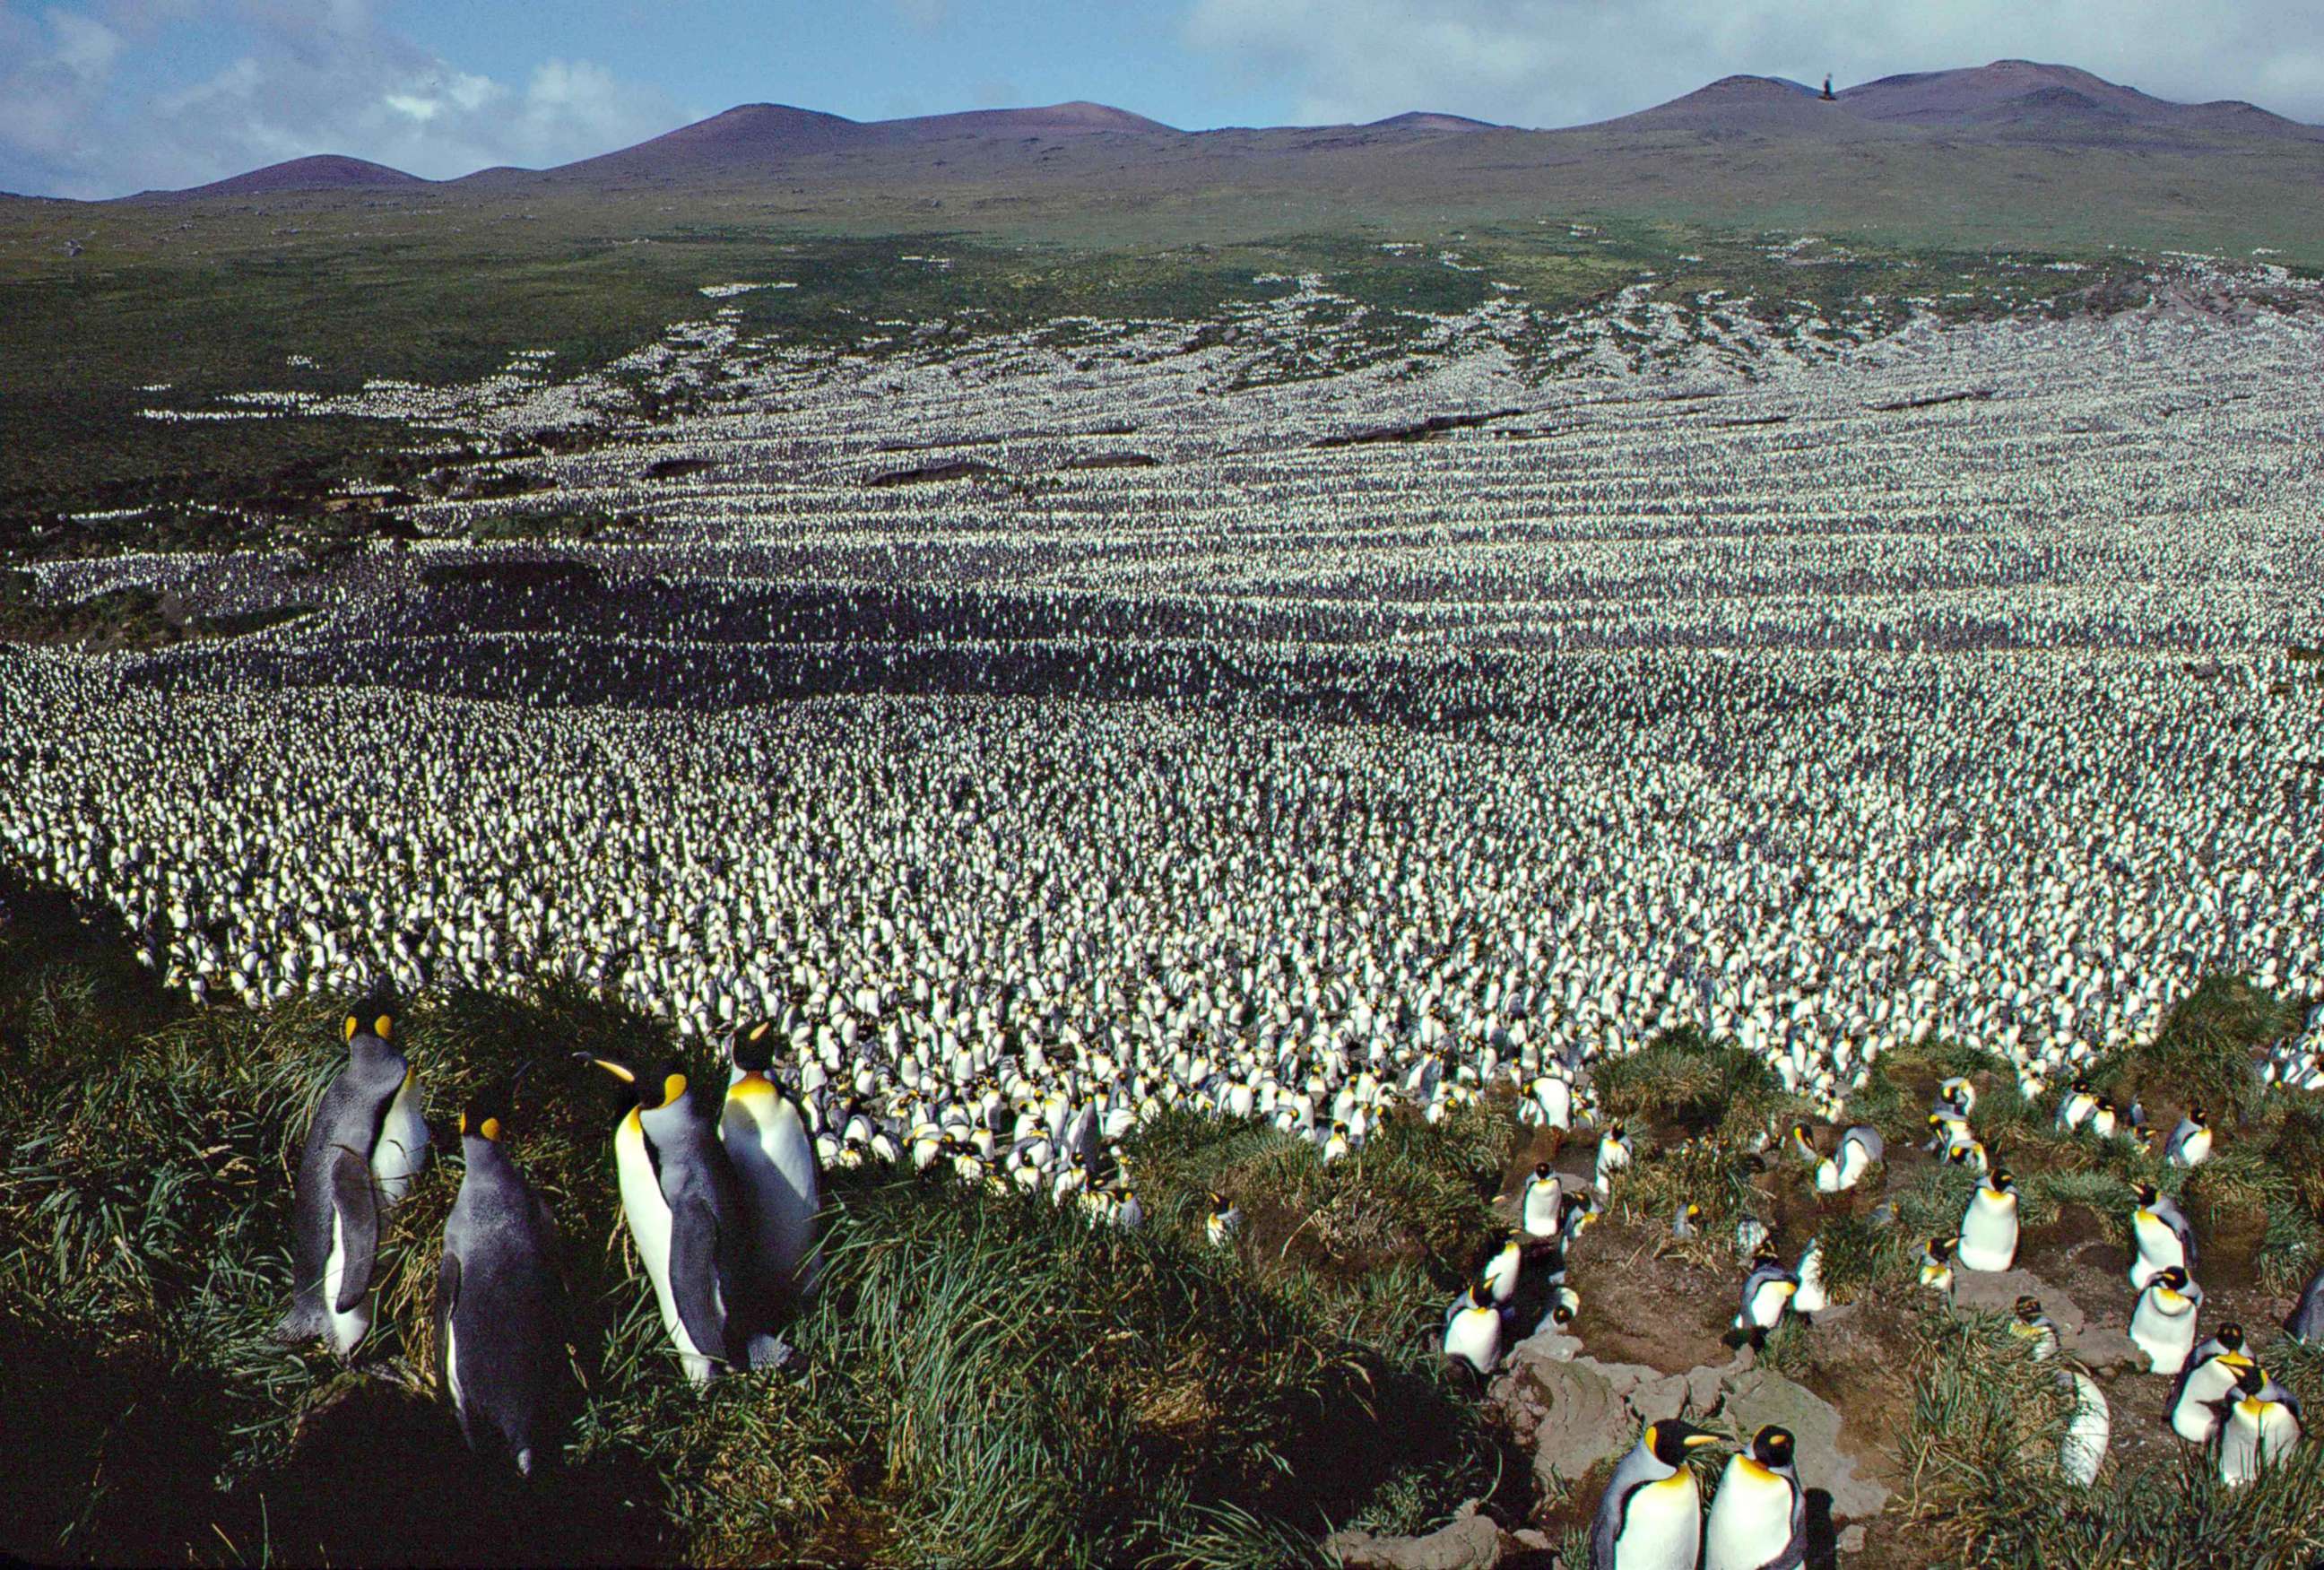 PHOTO: This handout photo taken in 1982 and released on July 30, 2018 by the French National Centre for Scientific Research shows a two-million-strong king penguin colony on Ile aux Cochon, part of Frances Iles Crozet archipelago.